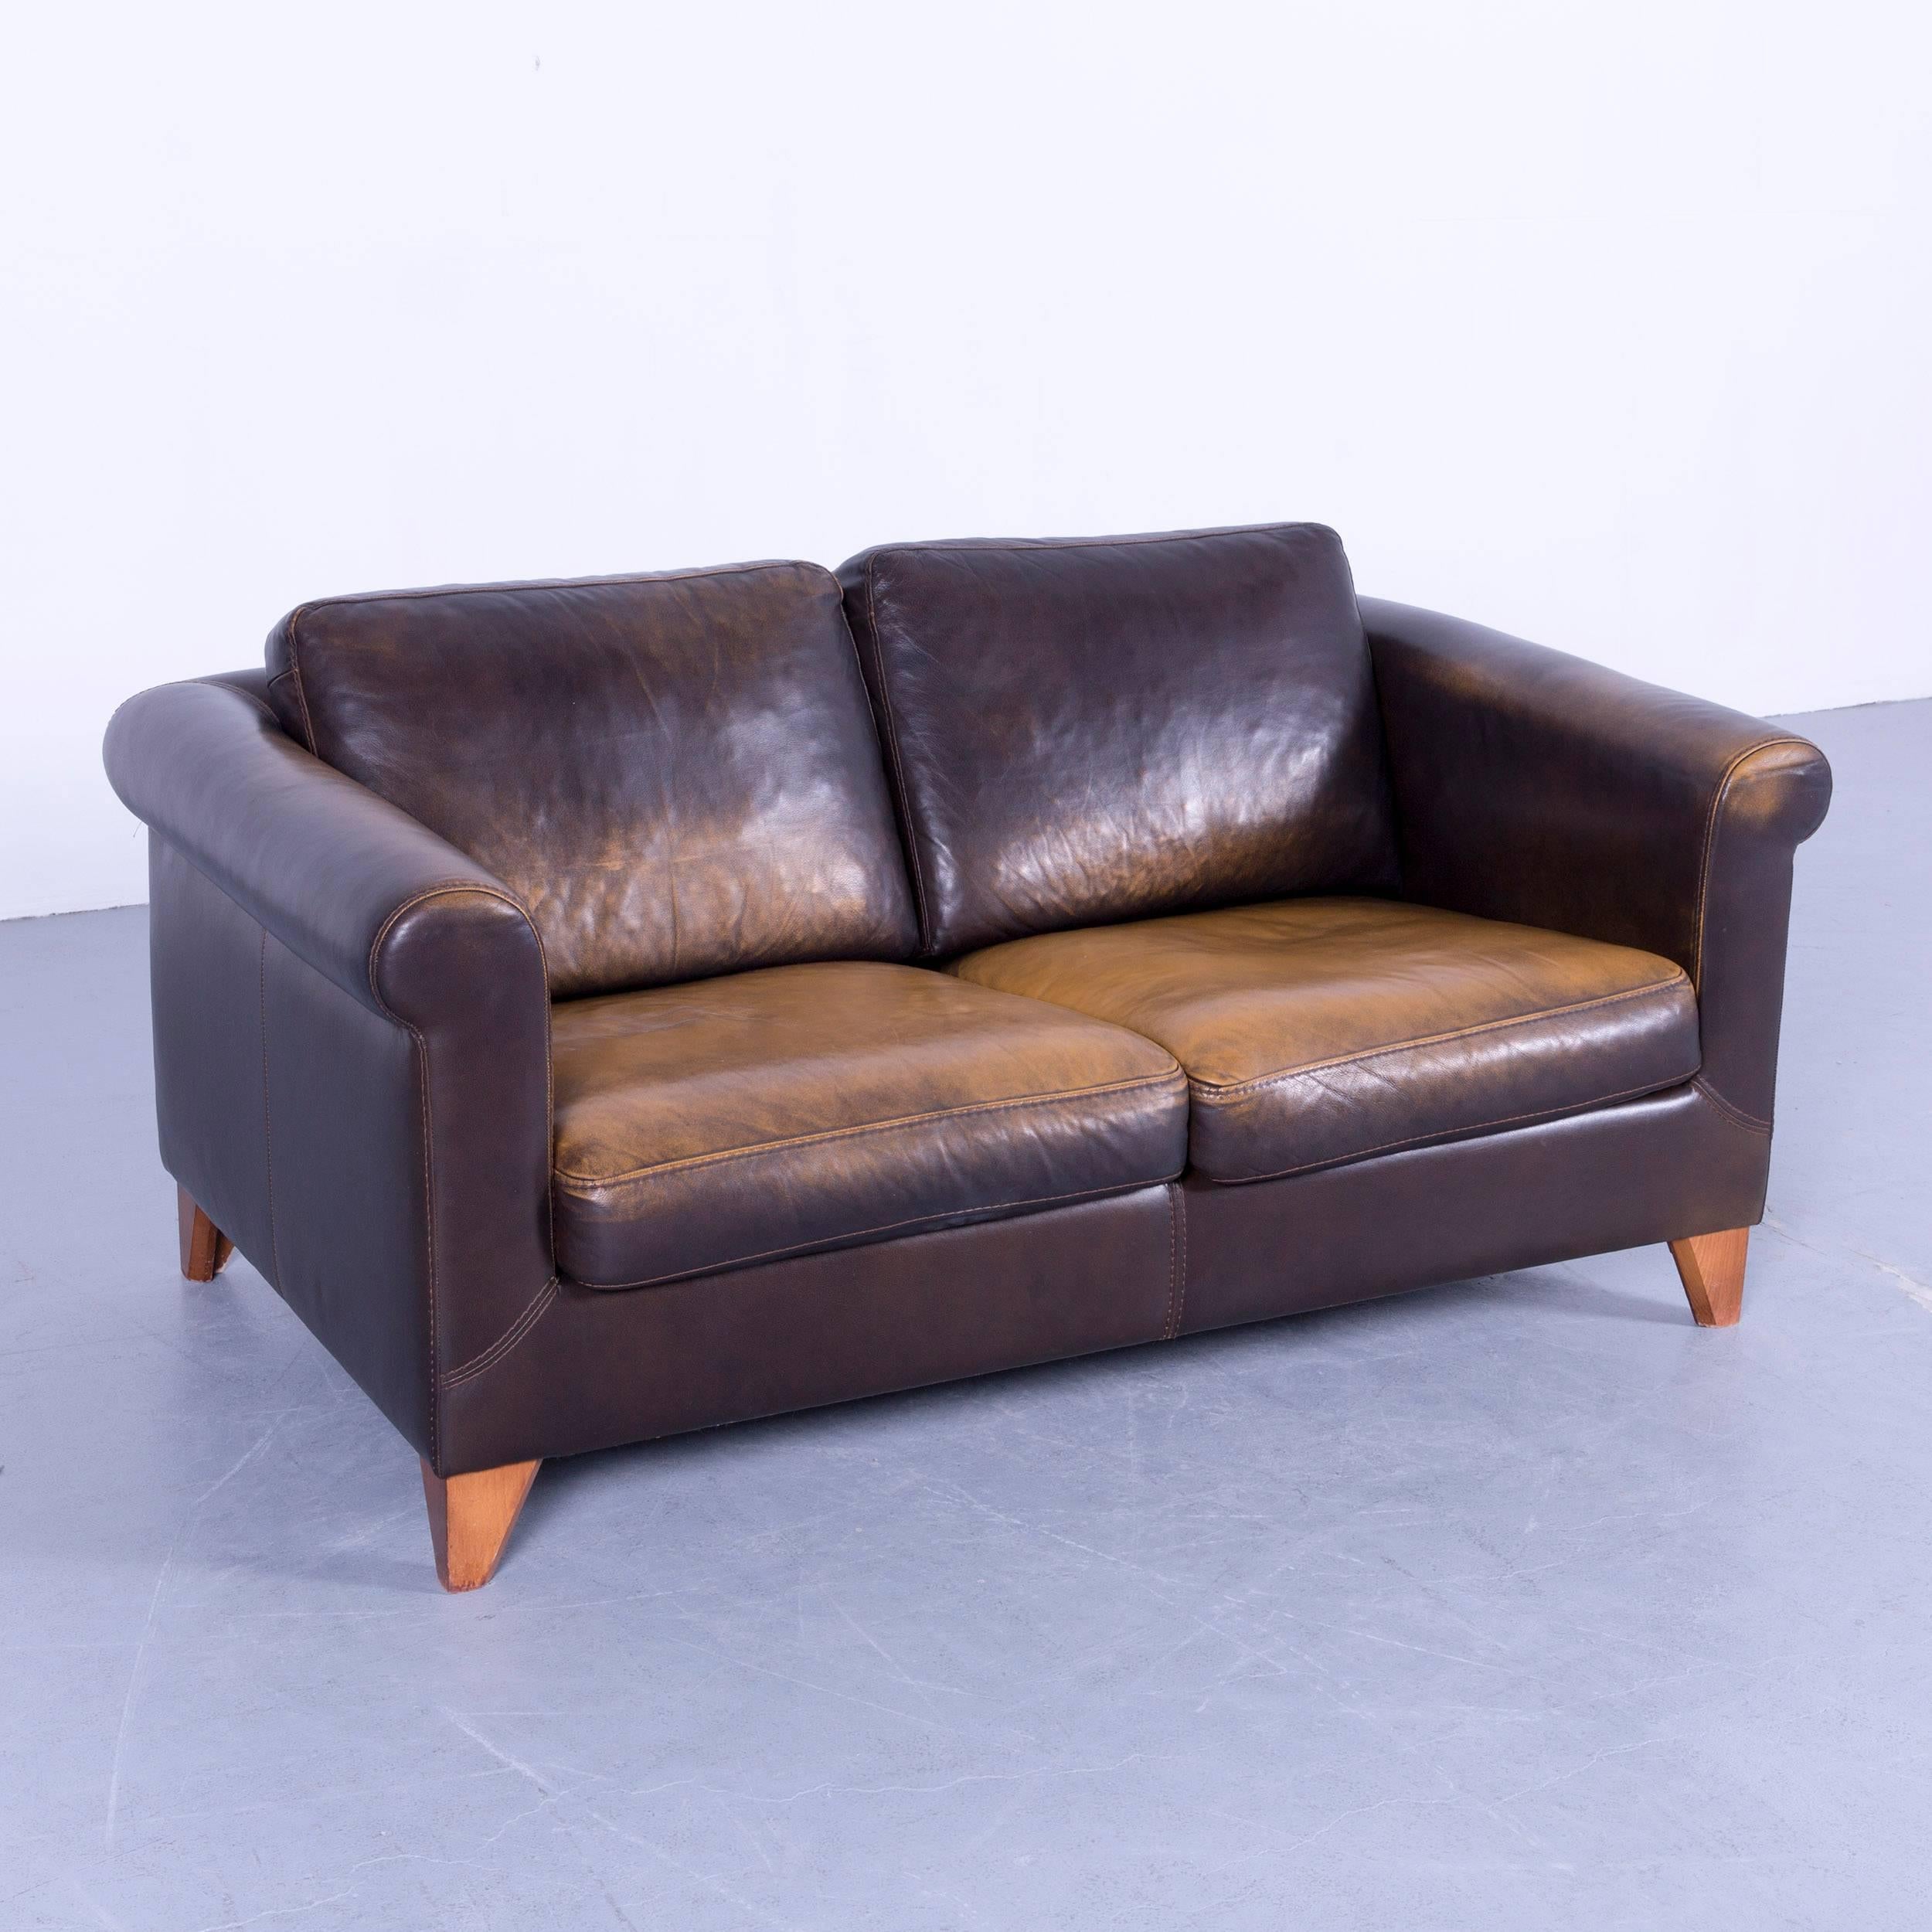 German Machalke Designer Two-Seat Sofa Set and Armchair Leather Brown Couch Modern